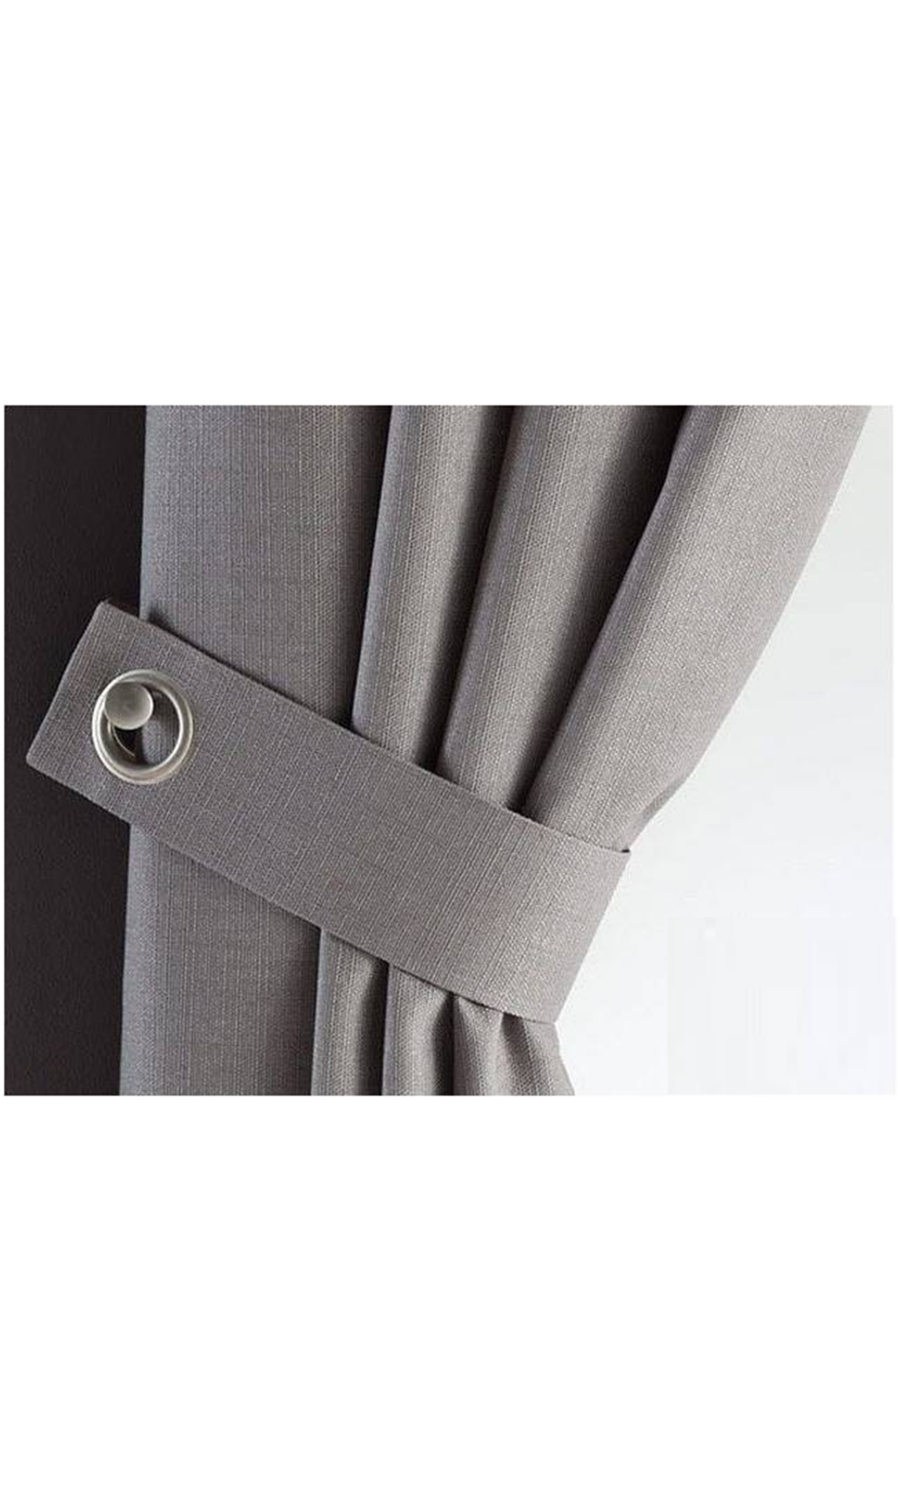 Curtain Tie Backs And Hold